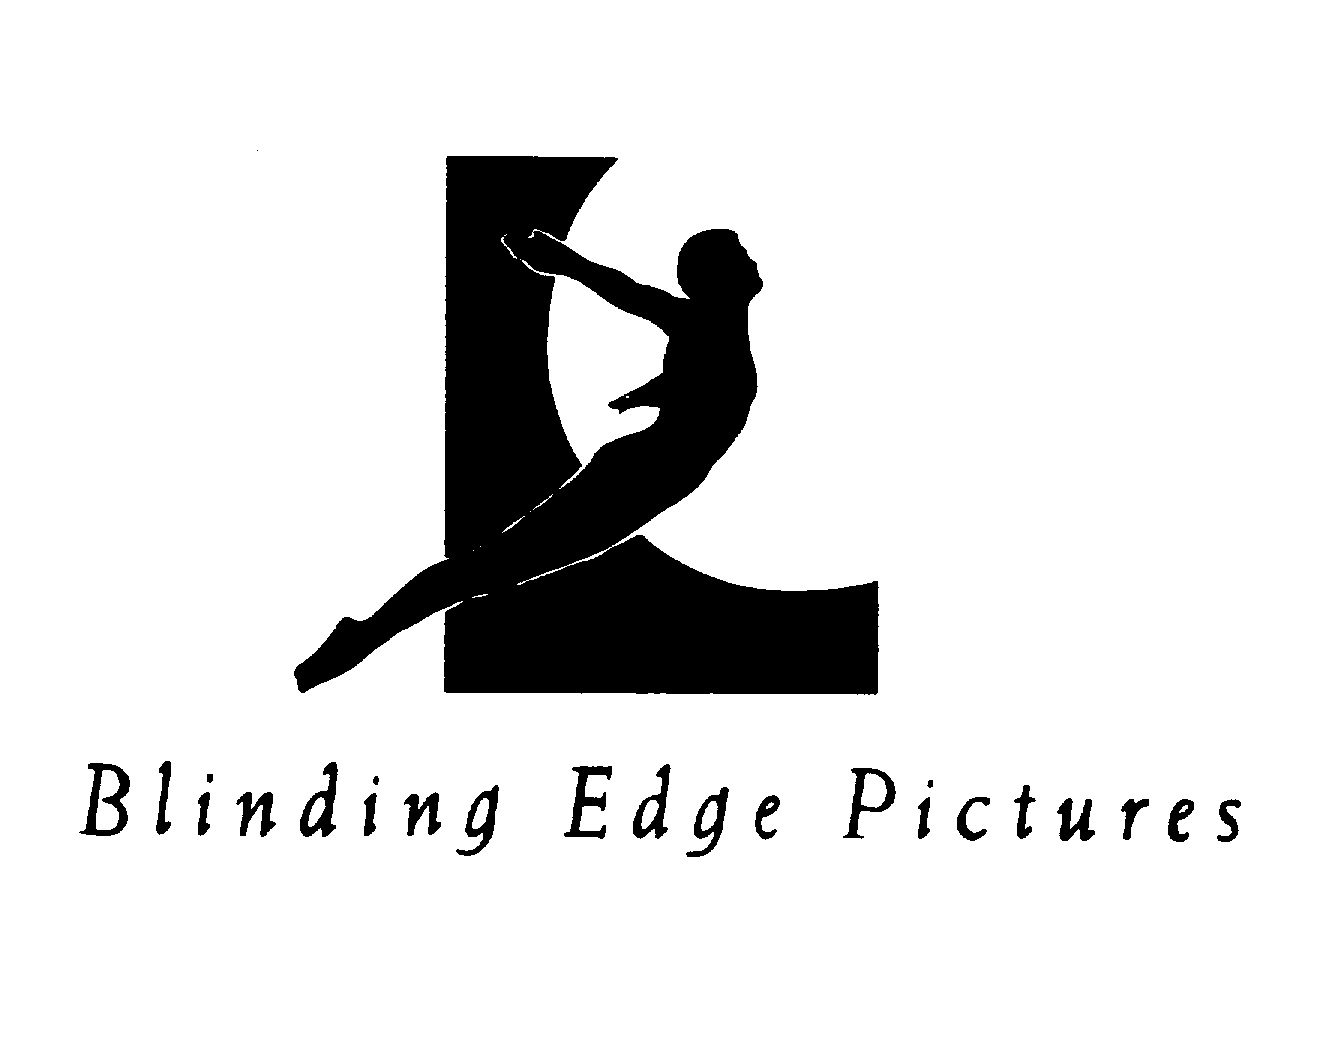 BLINDING EDGE PICTURES